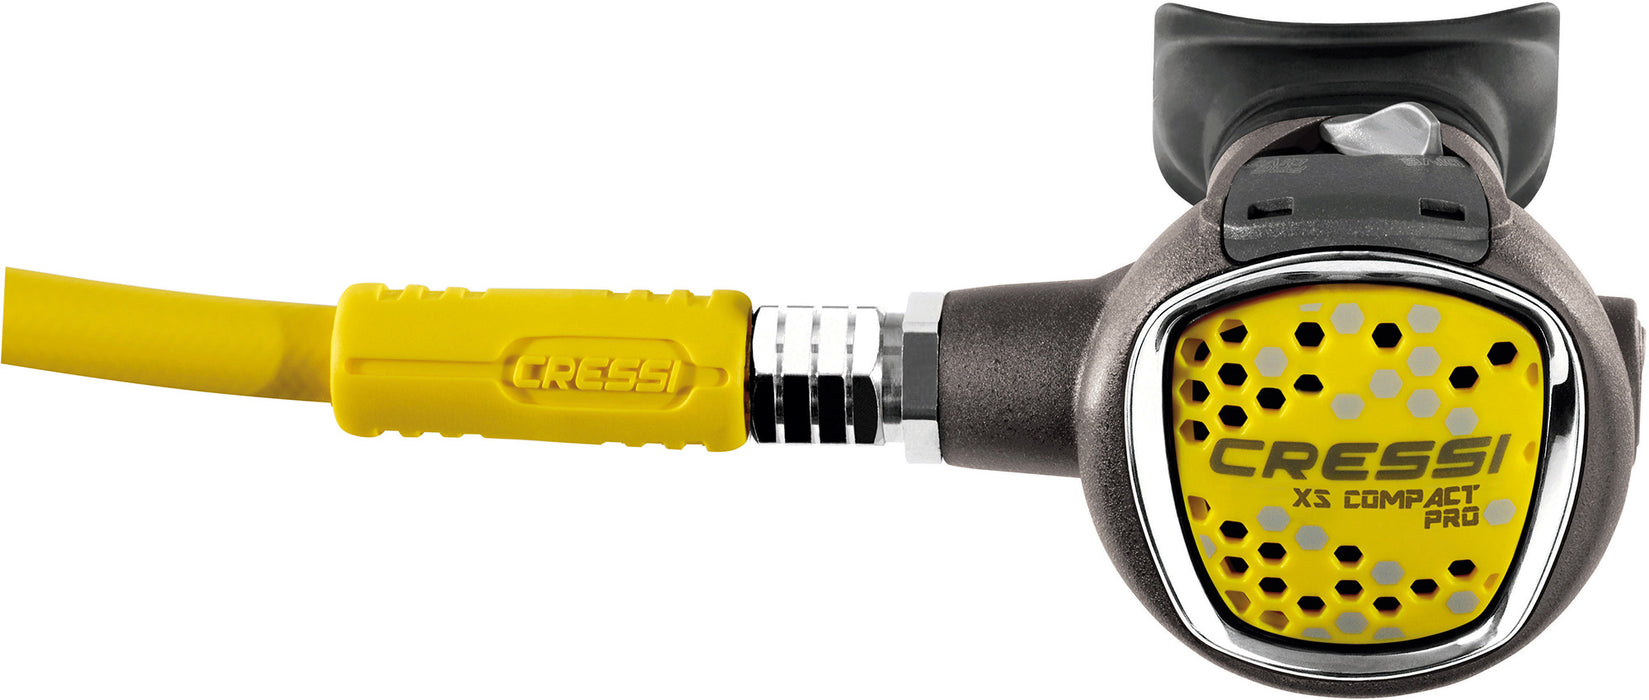 Cressi Octopus Compact Pro 2nd stage